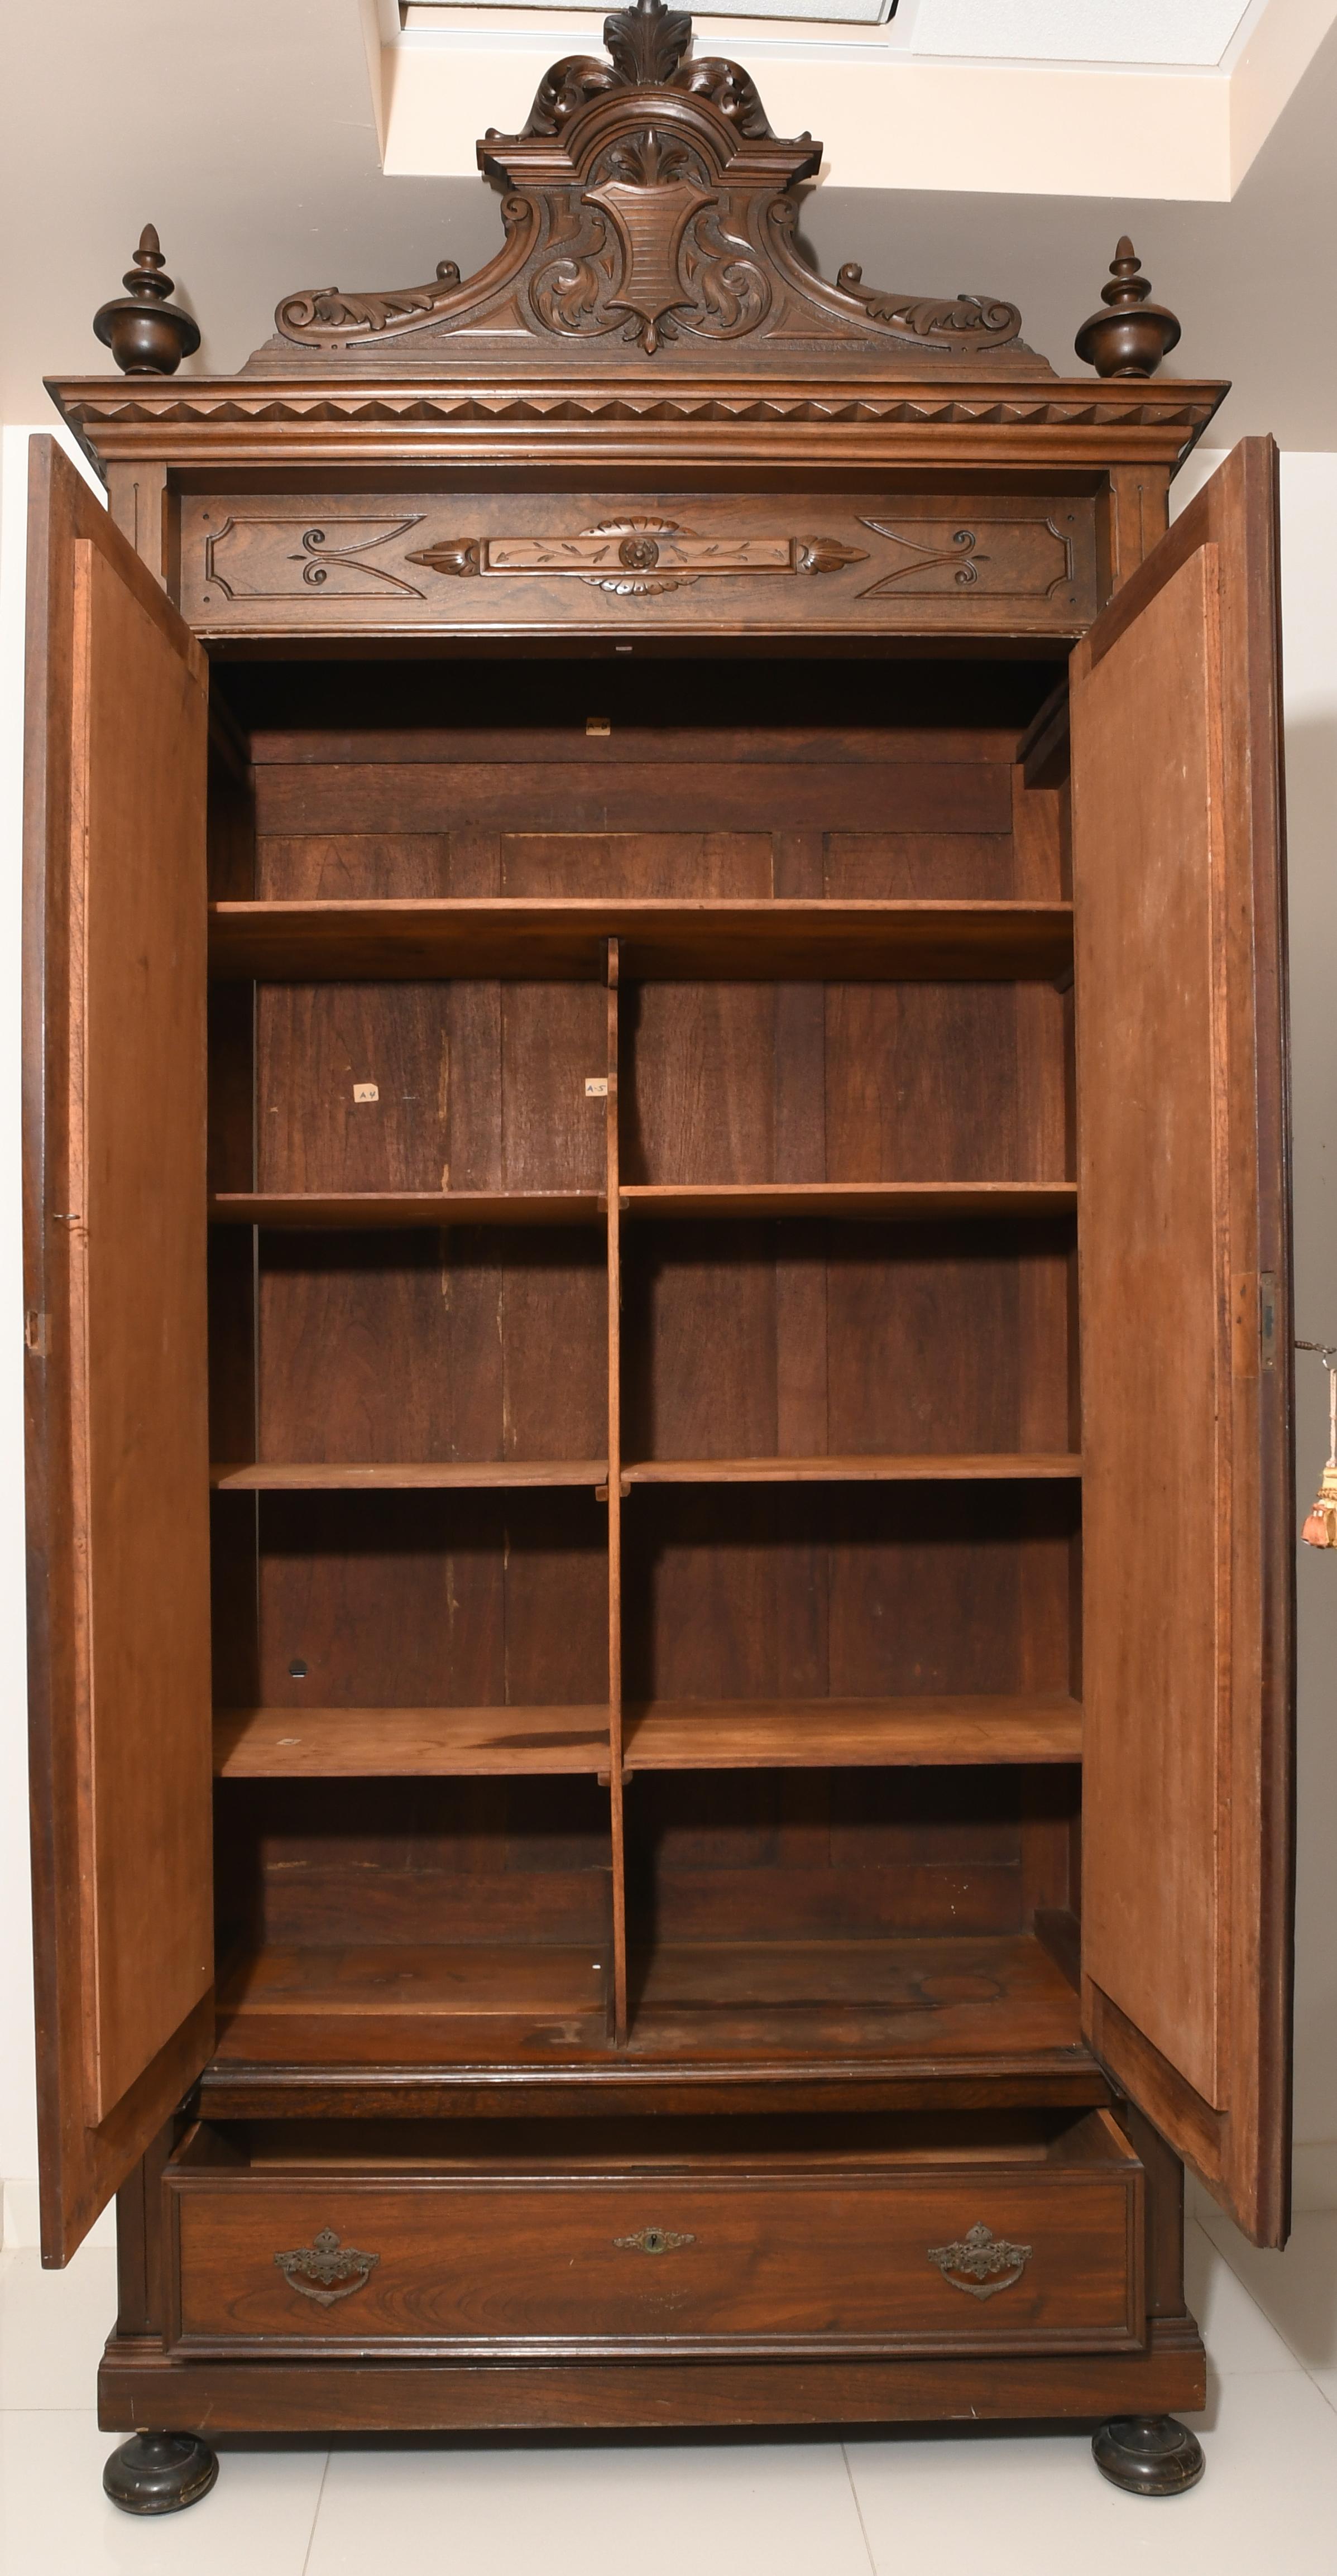 Dresser/Armoire from the Puerto Rican cabinetmaker Rafael Margarida who established his workshop in Old San Juan since 1892. The pediment has two inverted arcs that join to end in a crown. The center of the pediment is adorned with a carving